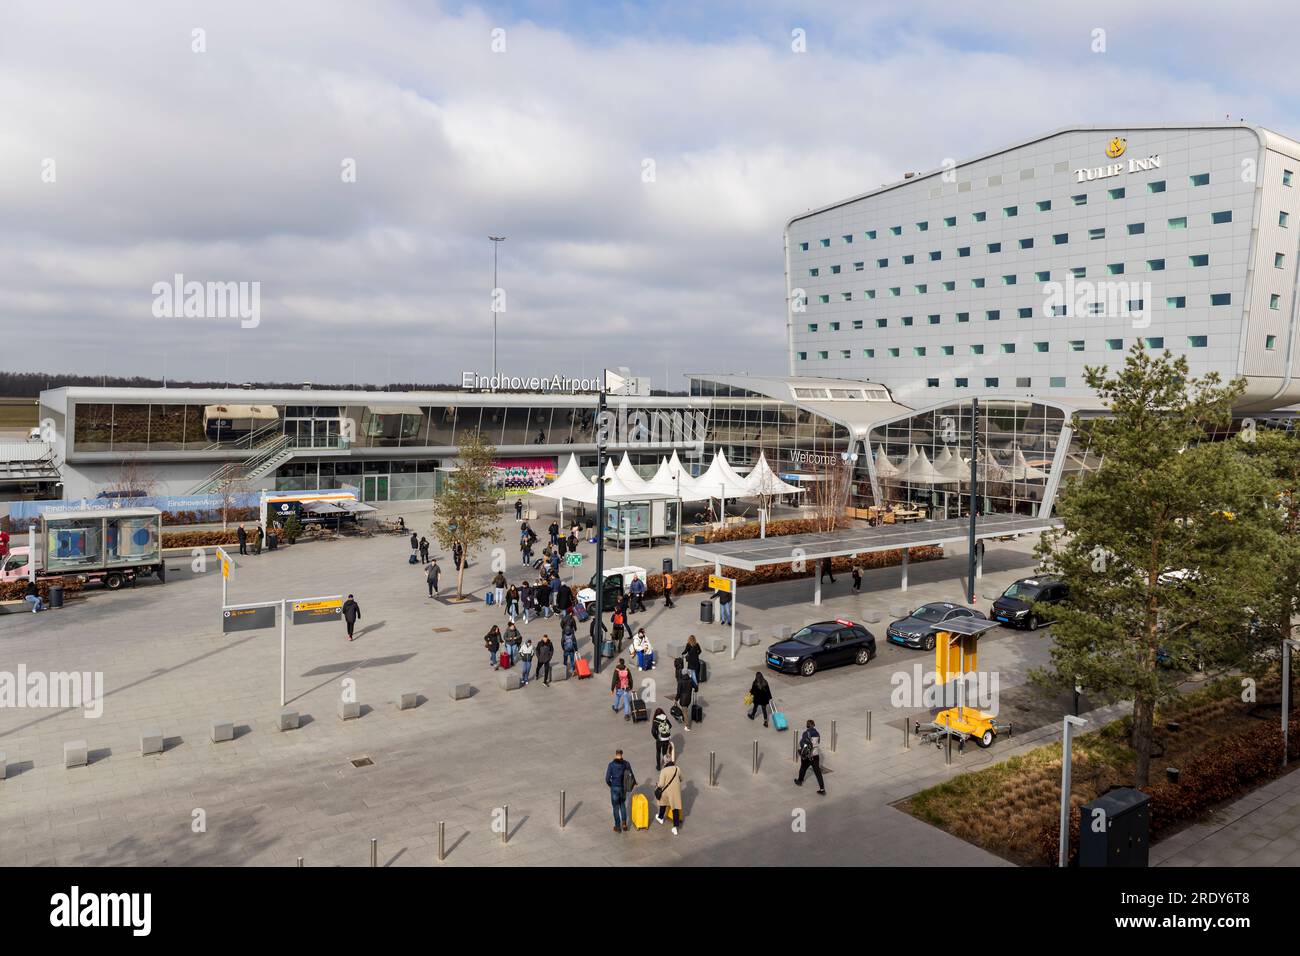 Eindhoeven, the Netherlands - 2023-03-03: Overview of Eindhoven airport terminal from outside Stock Photo